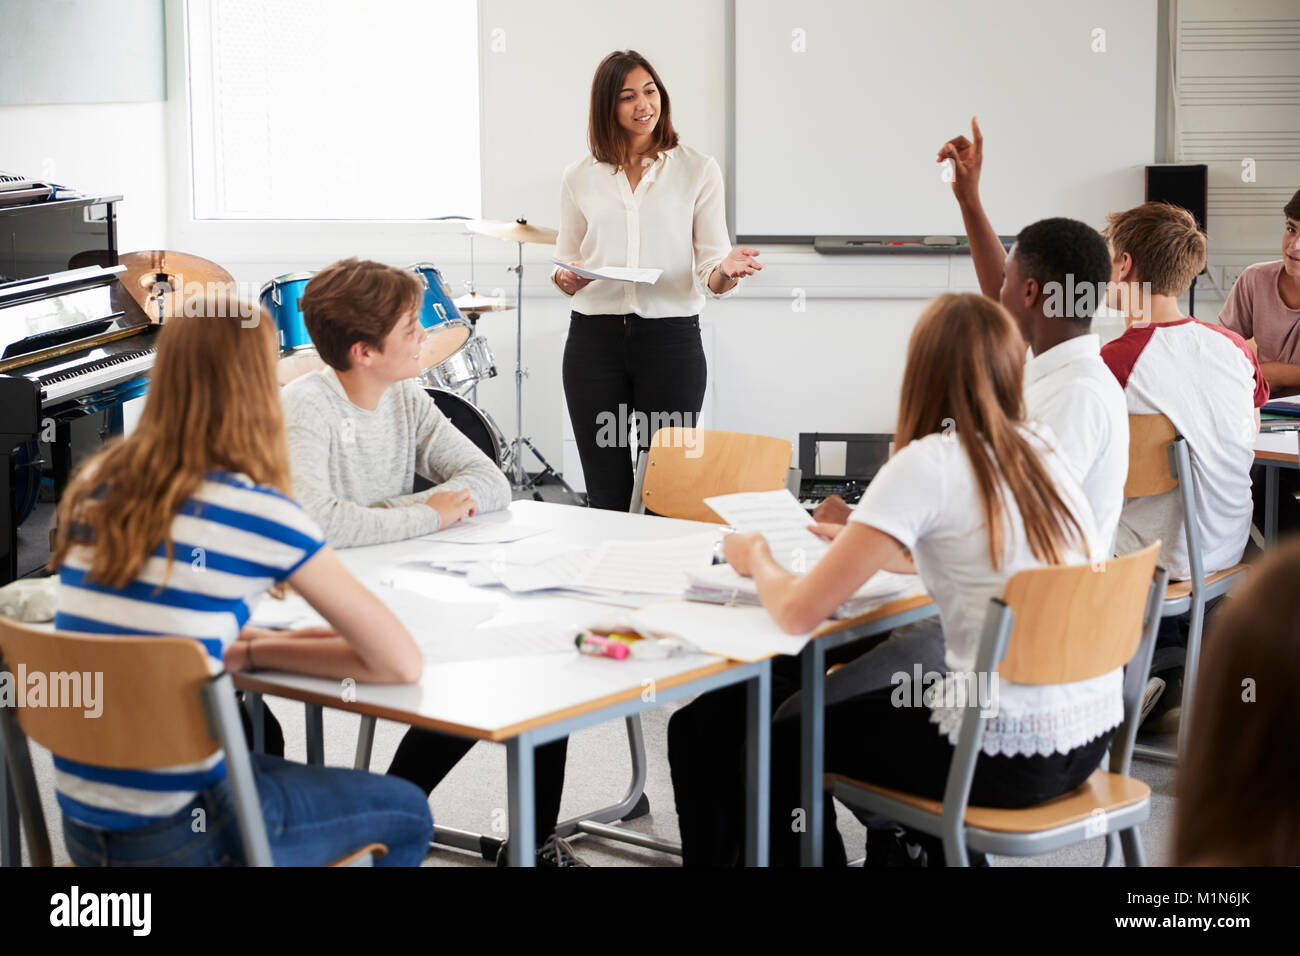 Teenage Students Studying In Music Class With Female Teacher Stock Photo -  Alamy